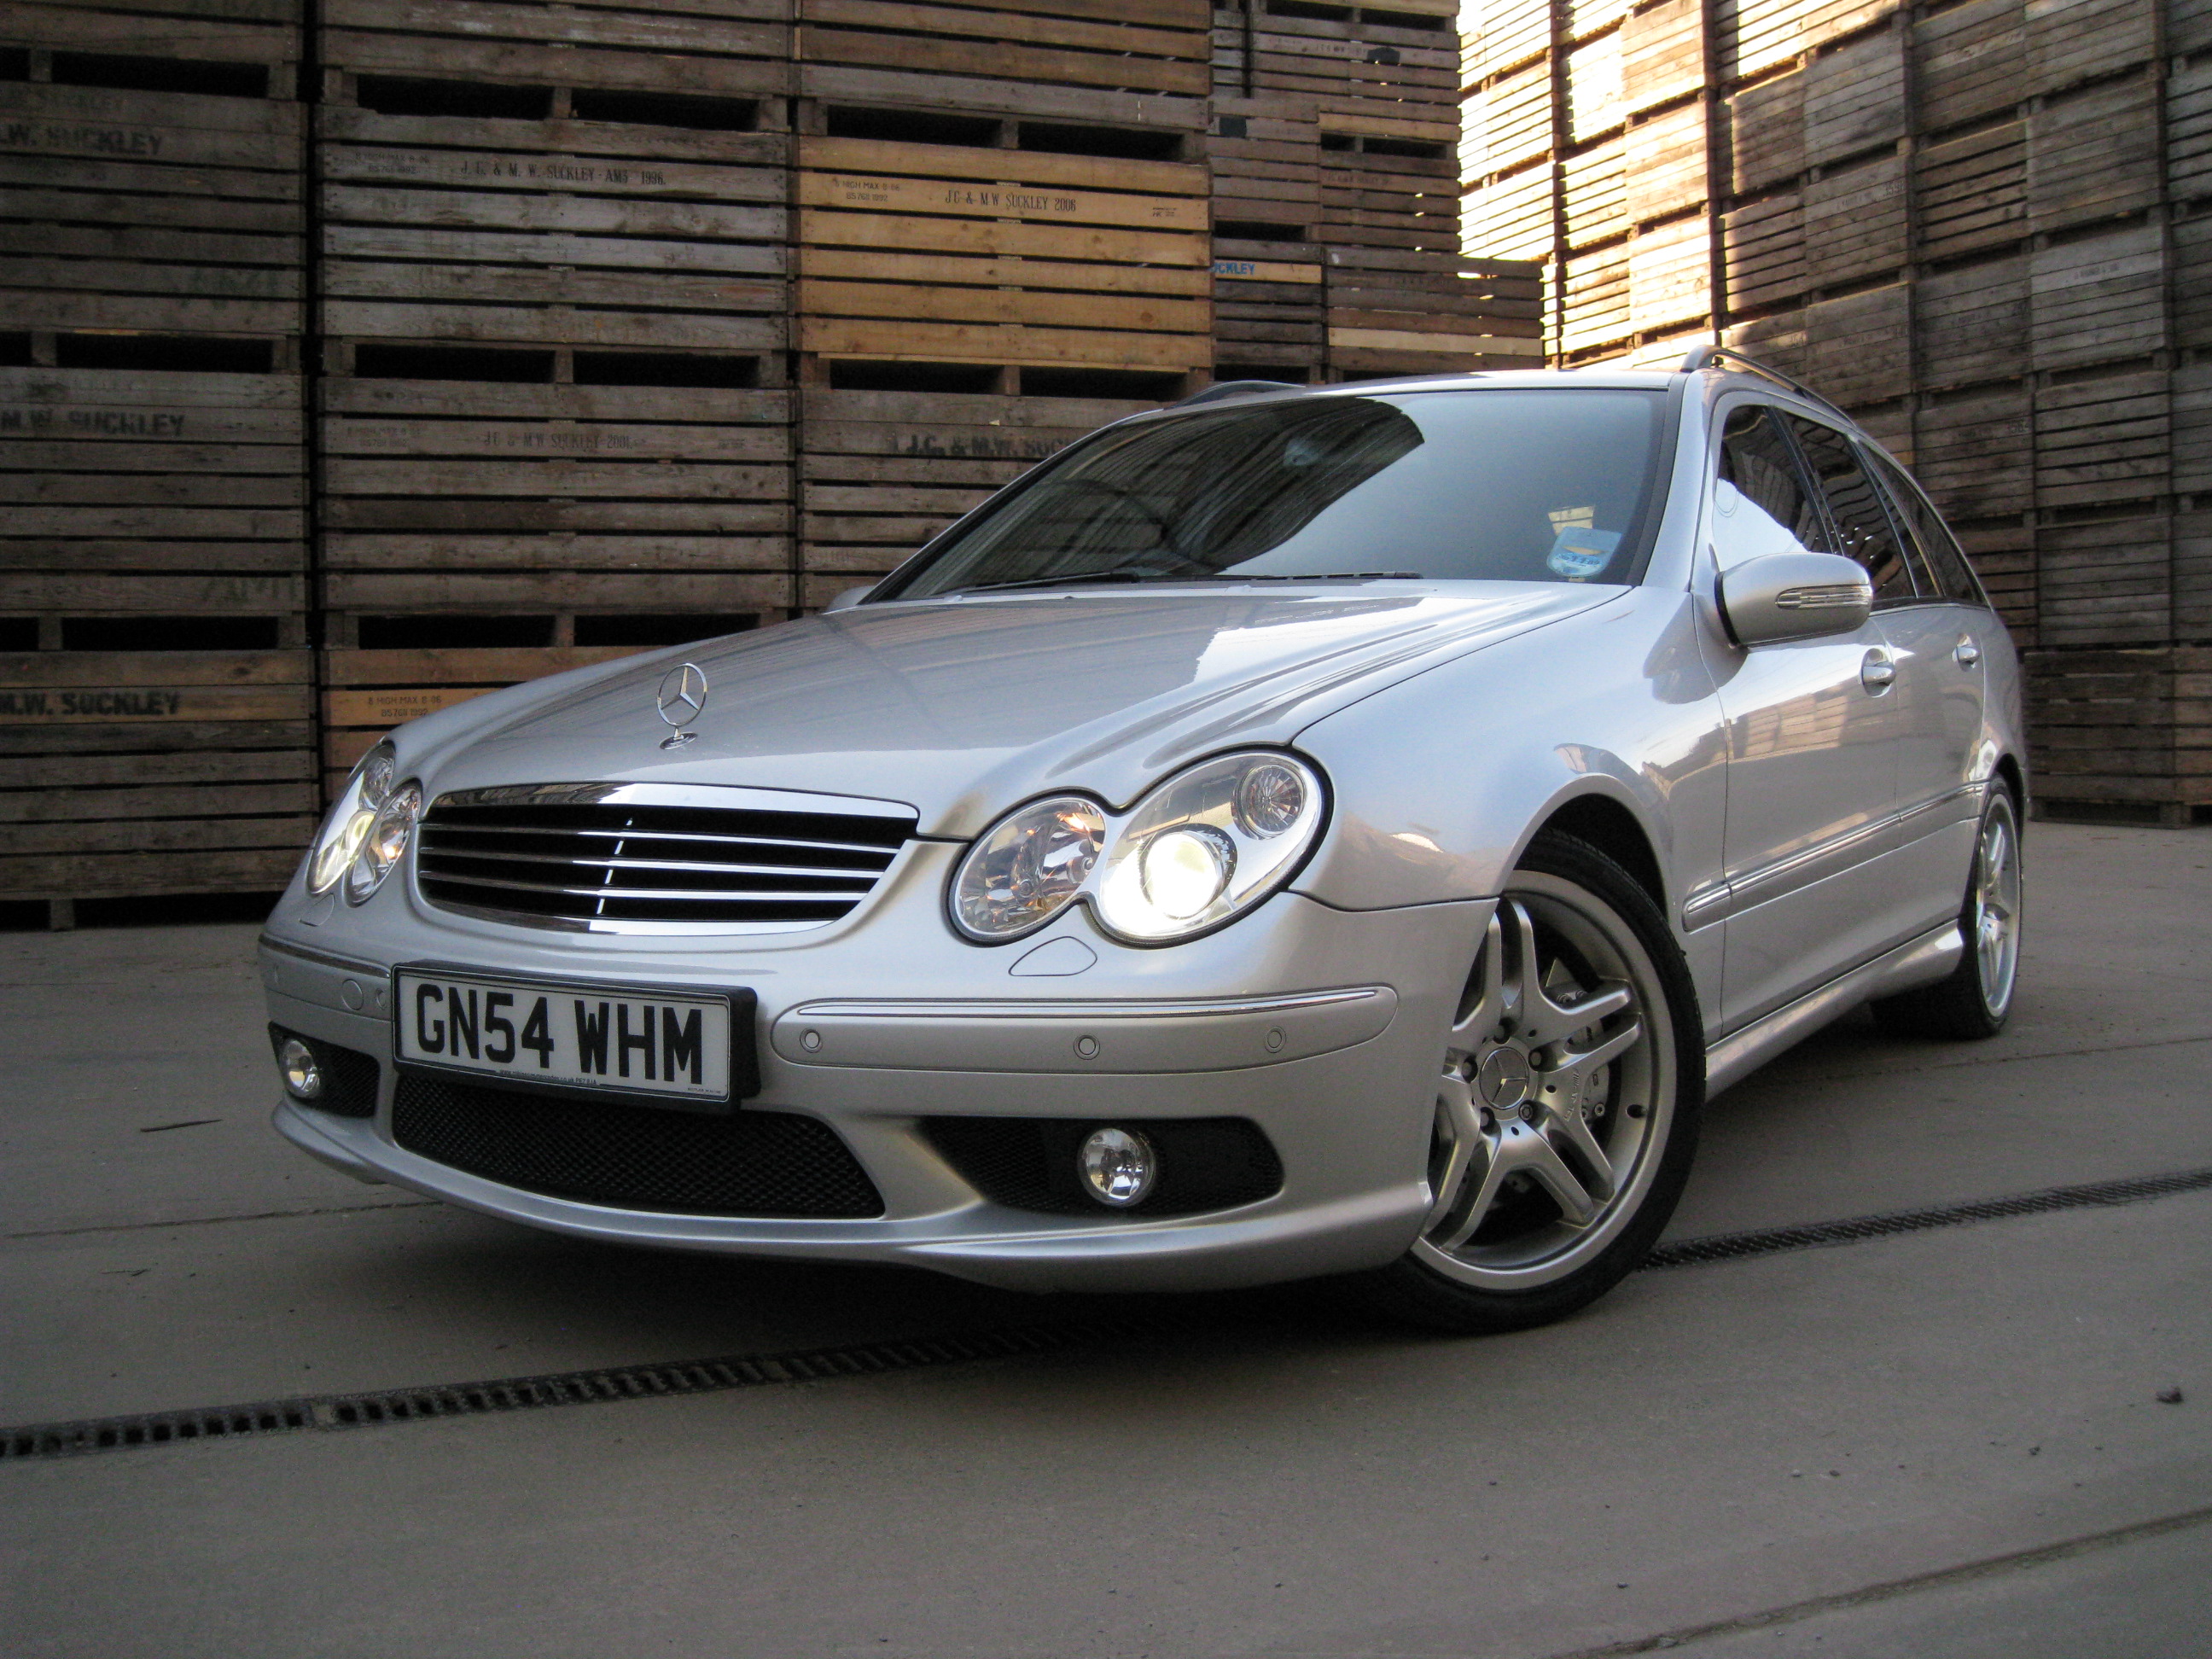 C55 AMG owner saying hi! - Page 1 - Readers' Cars - PistonHeads